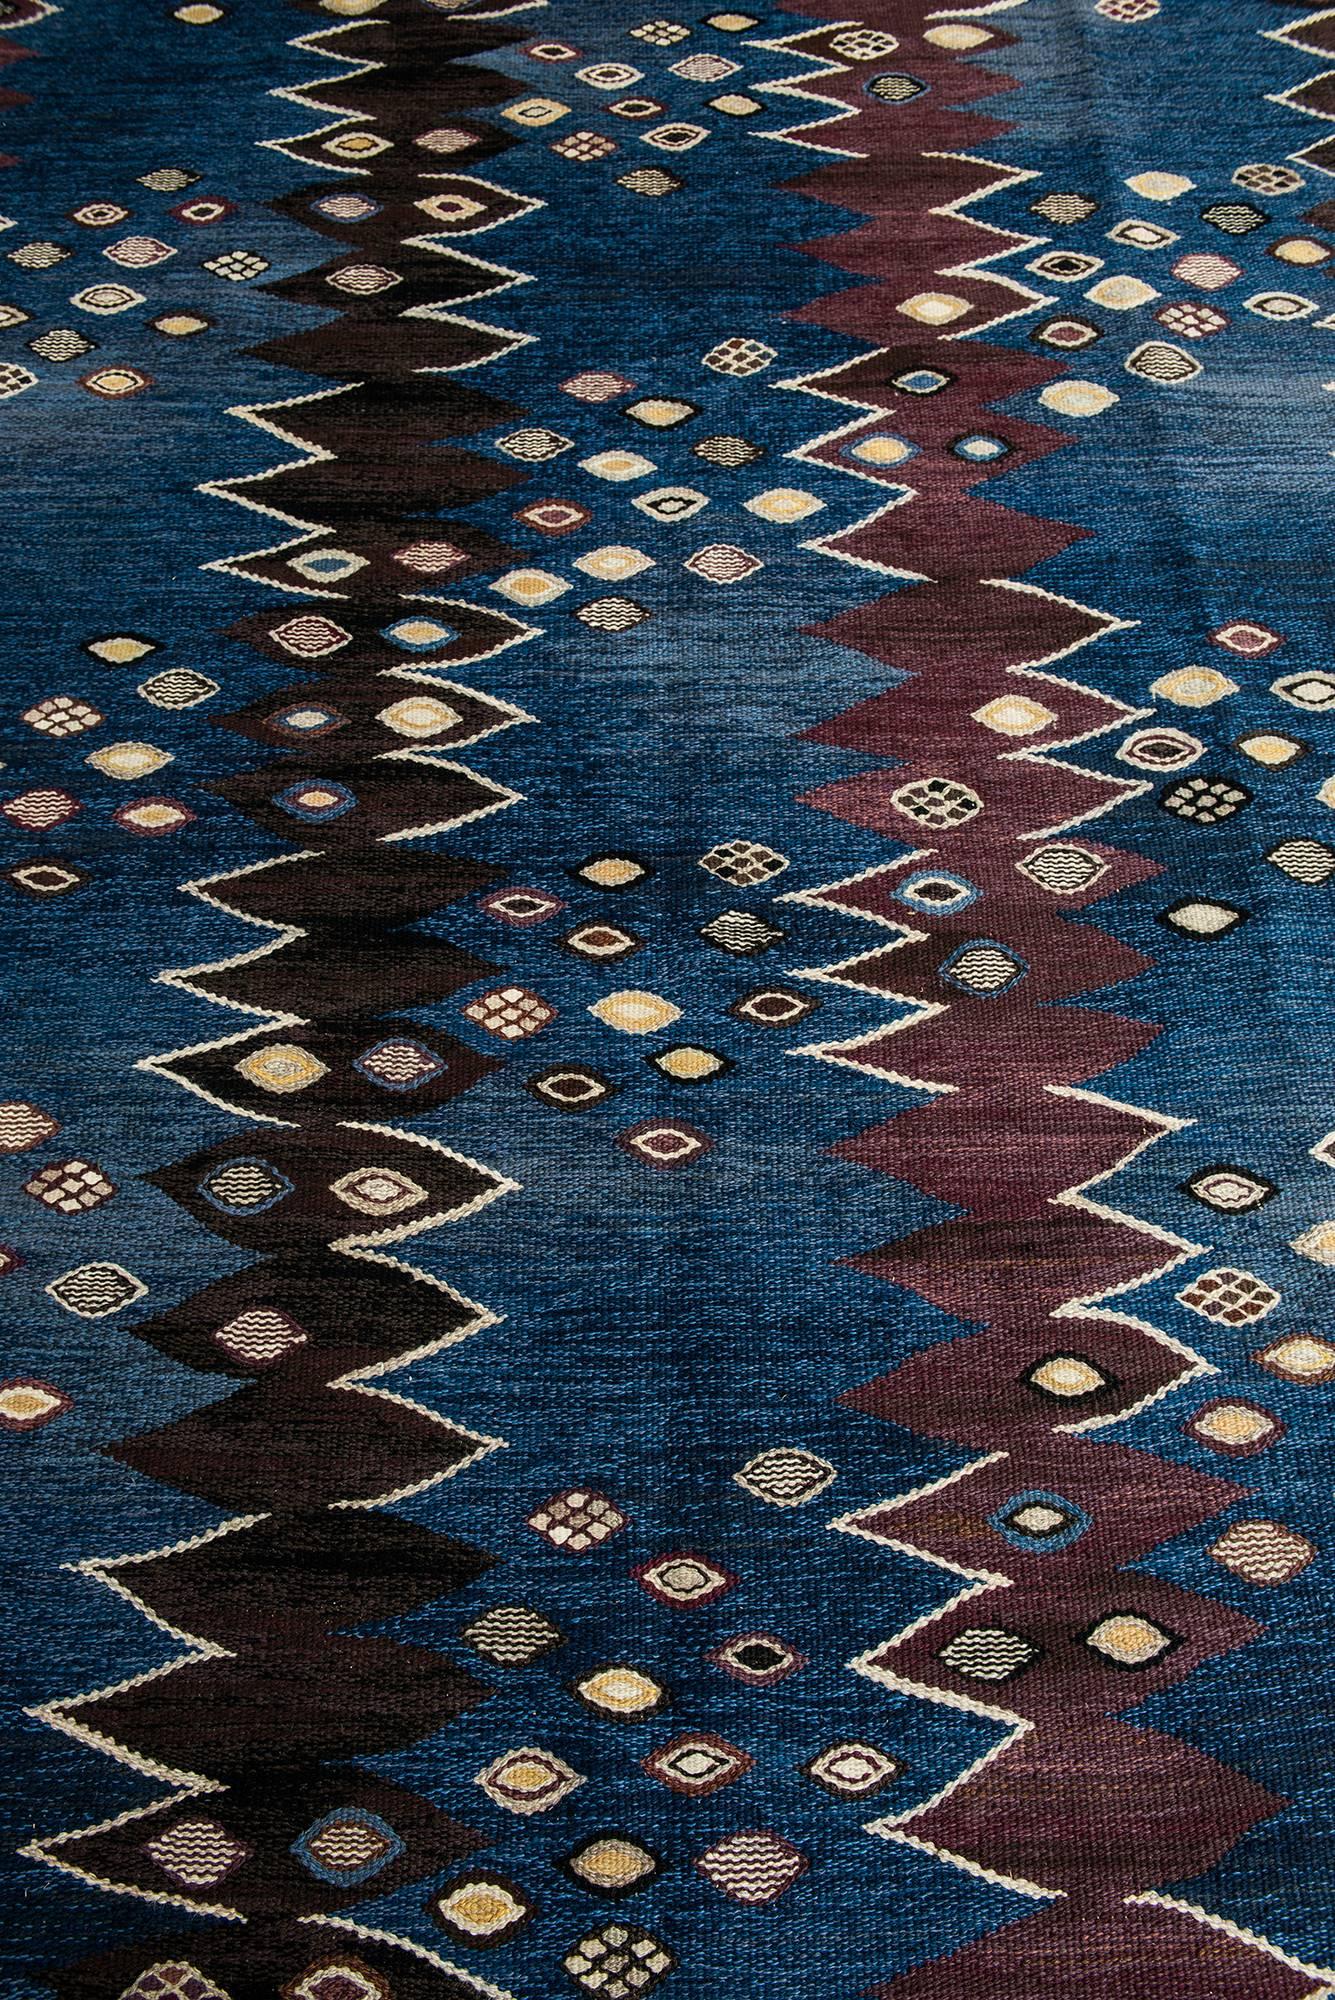 Rare carpet model Snäckorna designed by Barbro Nilsson. Produced by Marta Maas-Fjetterström AB in Sweden.